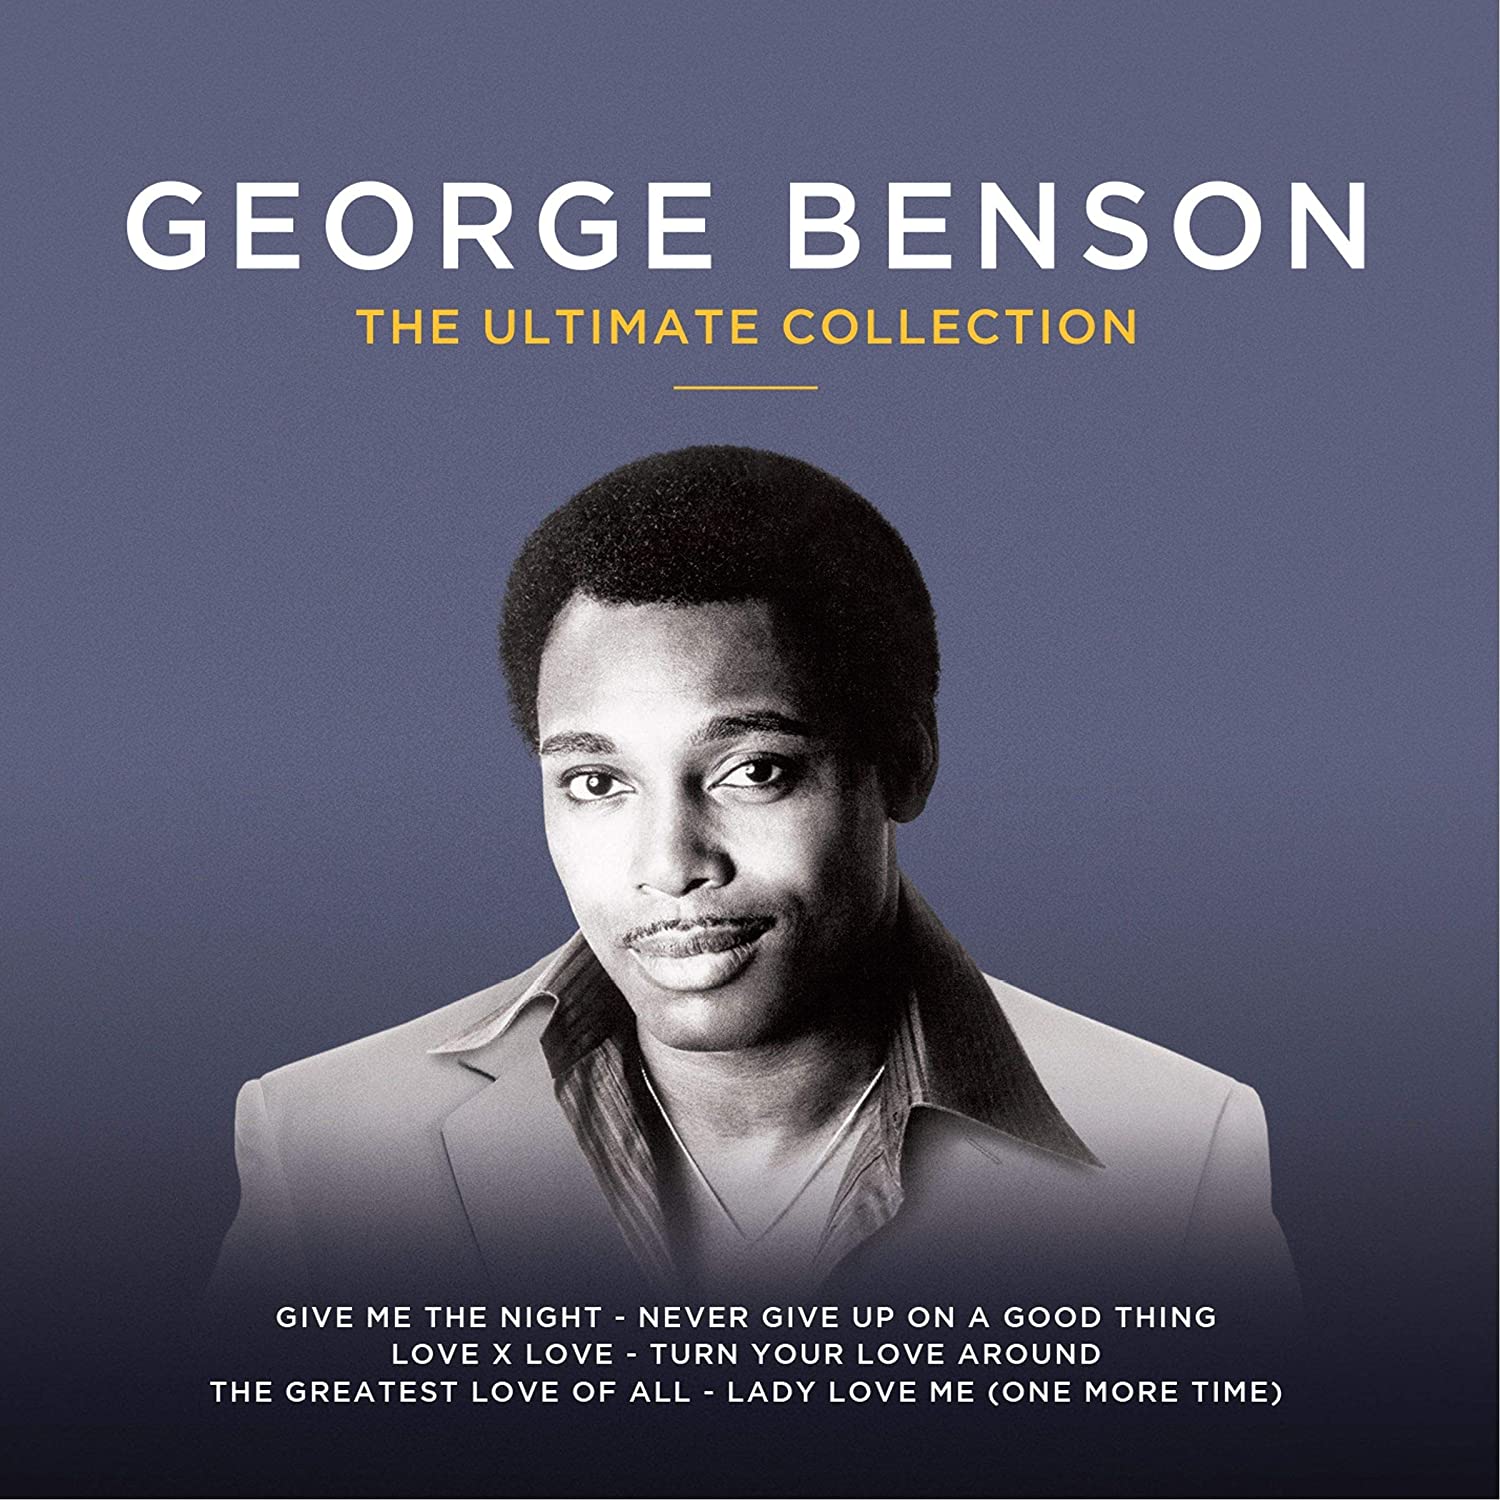 Art for This Masquerade by George Benson